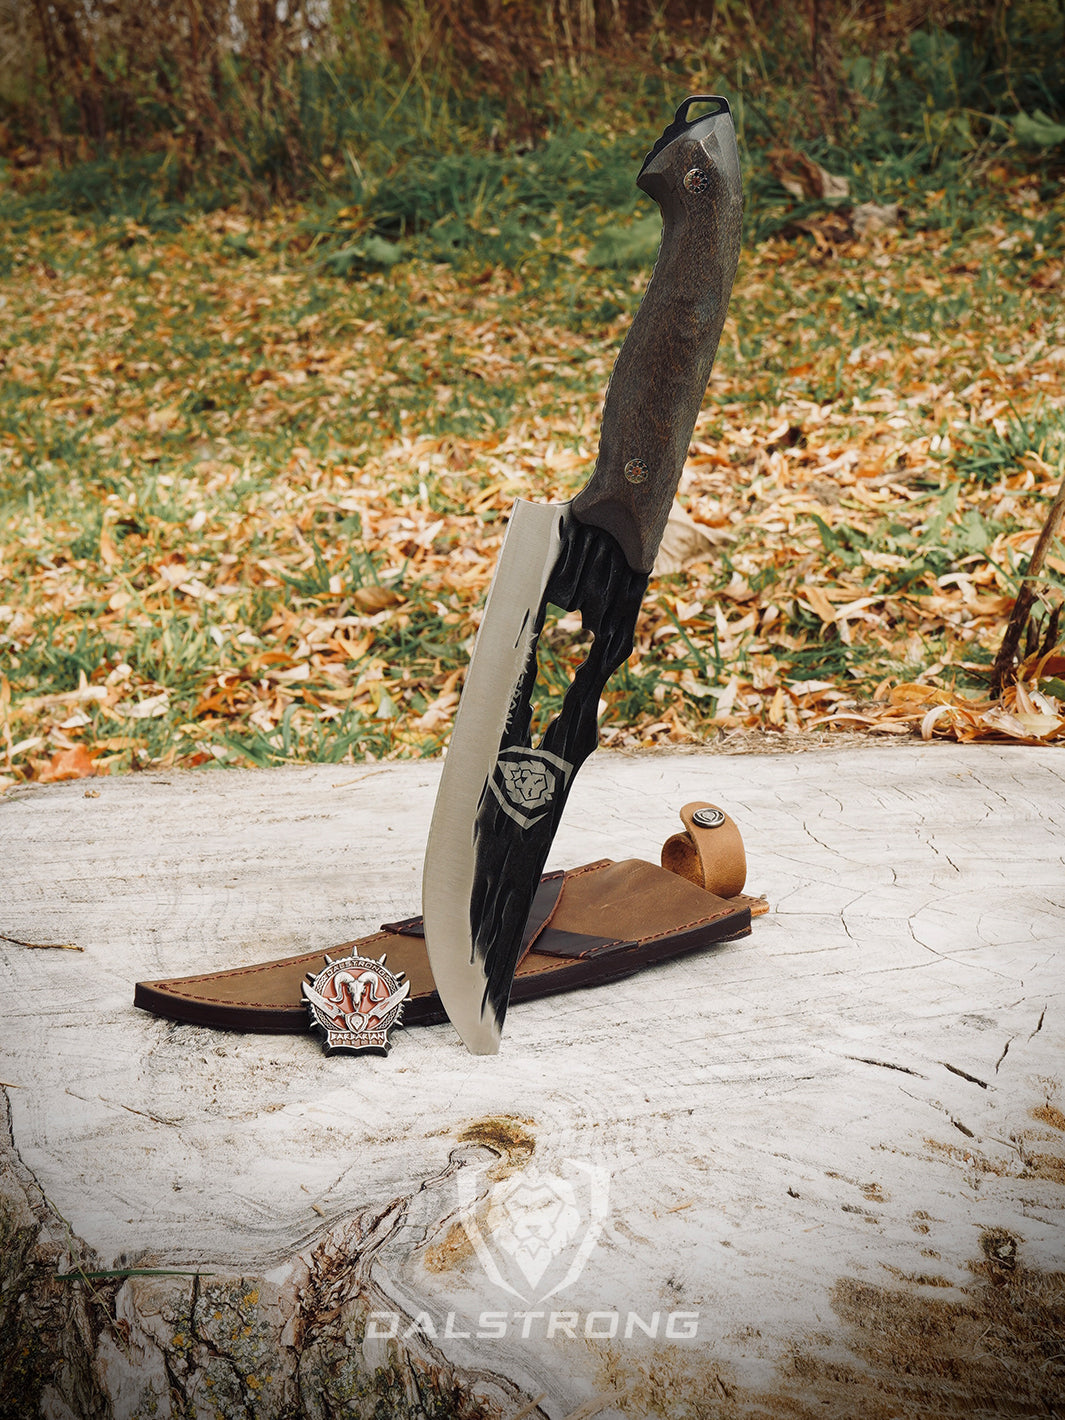 Dalstrong barbarian series 8 inch chef knife with wooden handle beside it's sheath on a log.